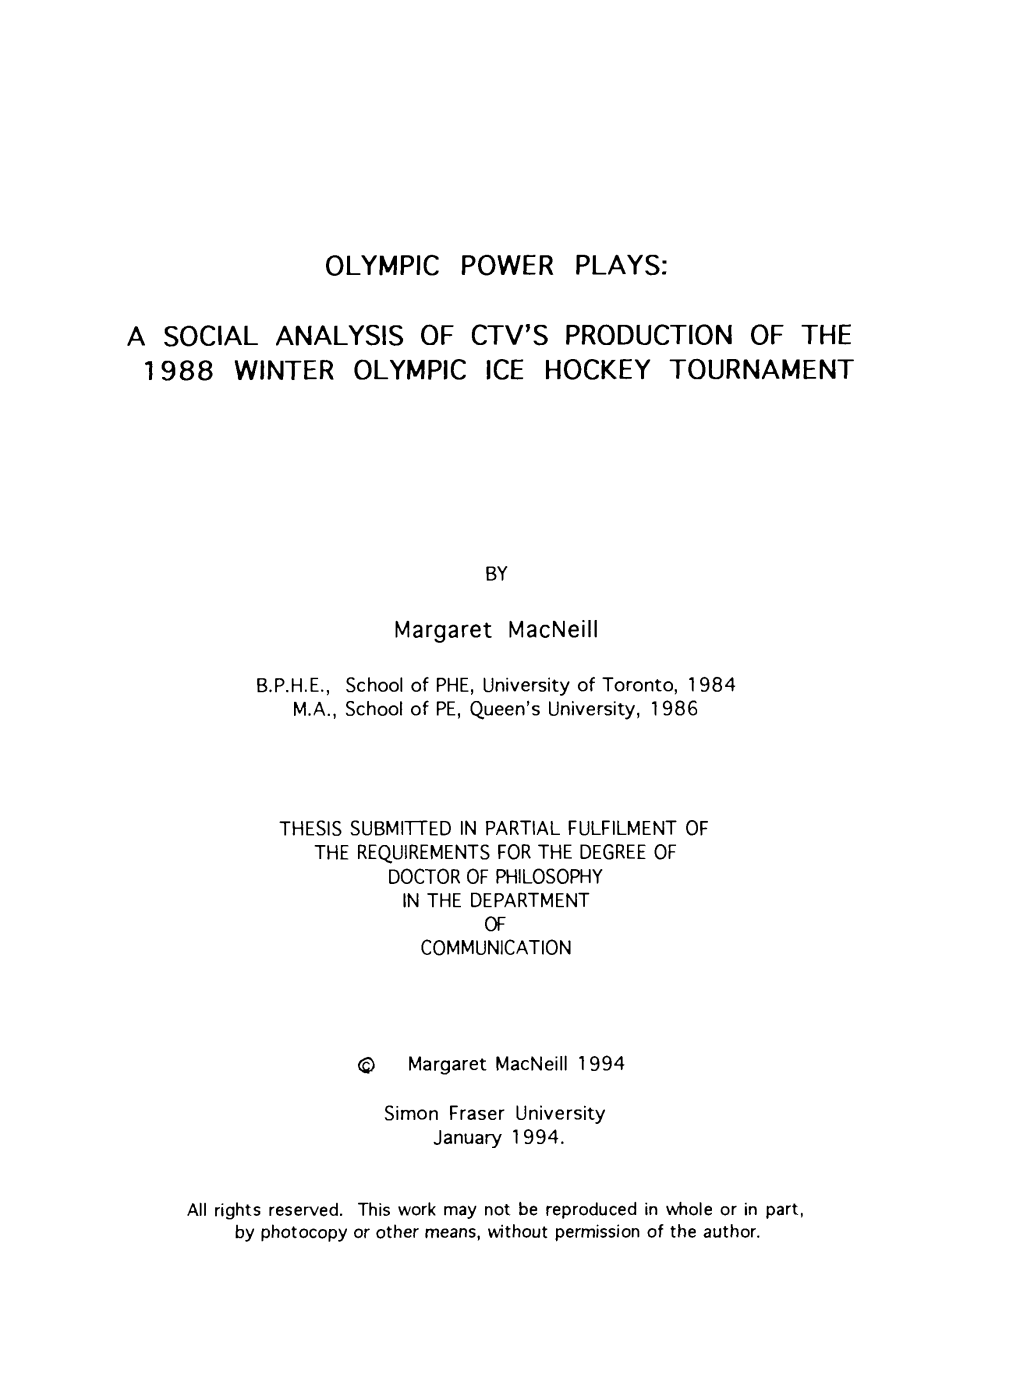 A Social Analysis of Ctv's Production of the 1988 Winter Olympic Ice Hockey Tournament